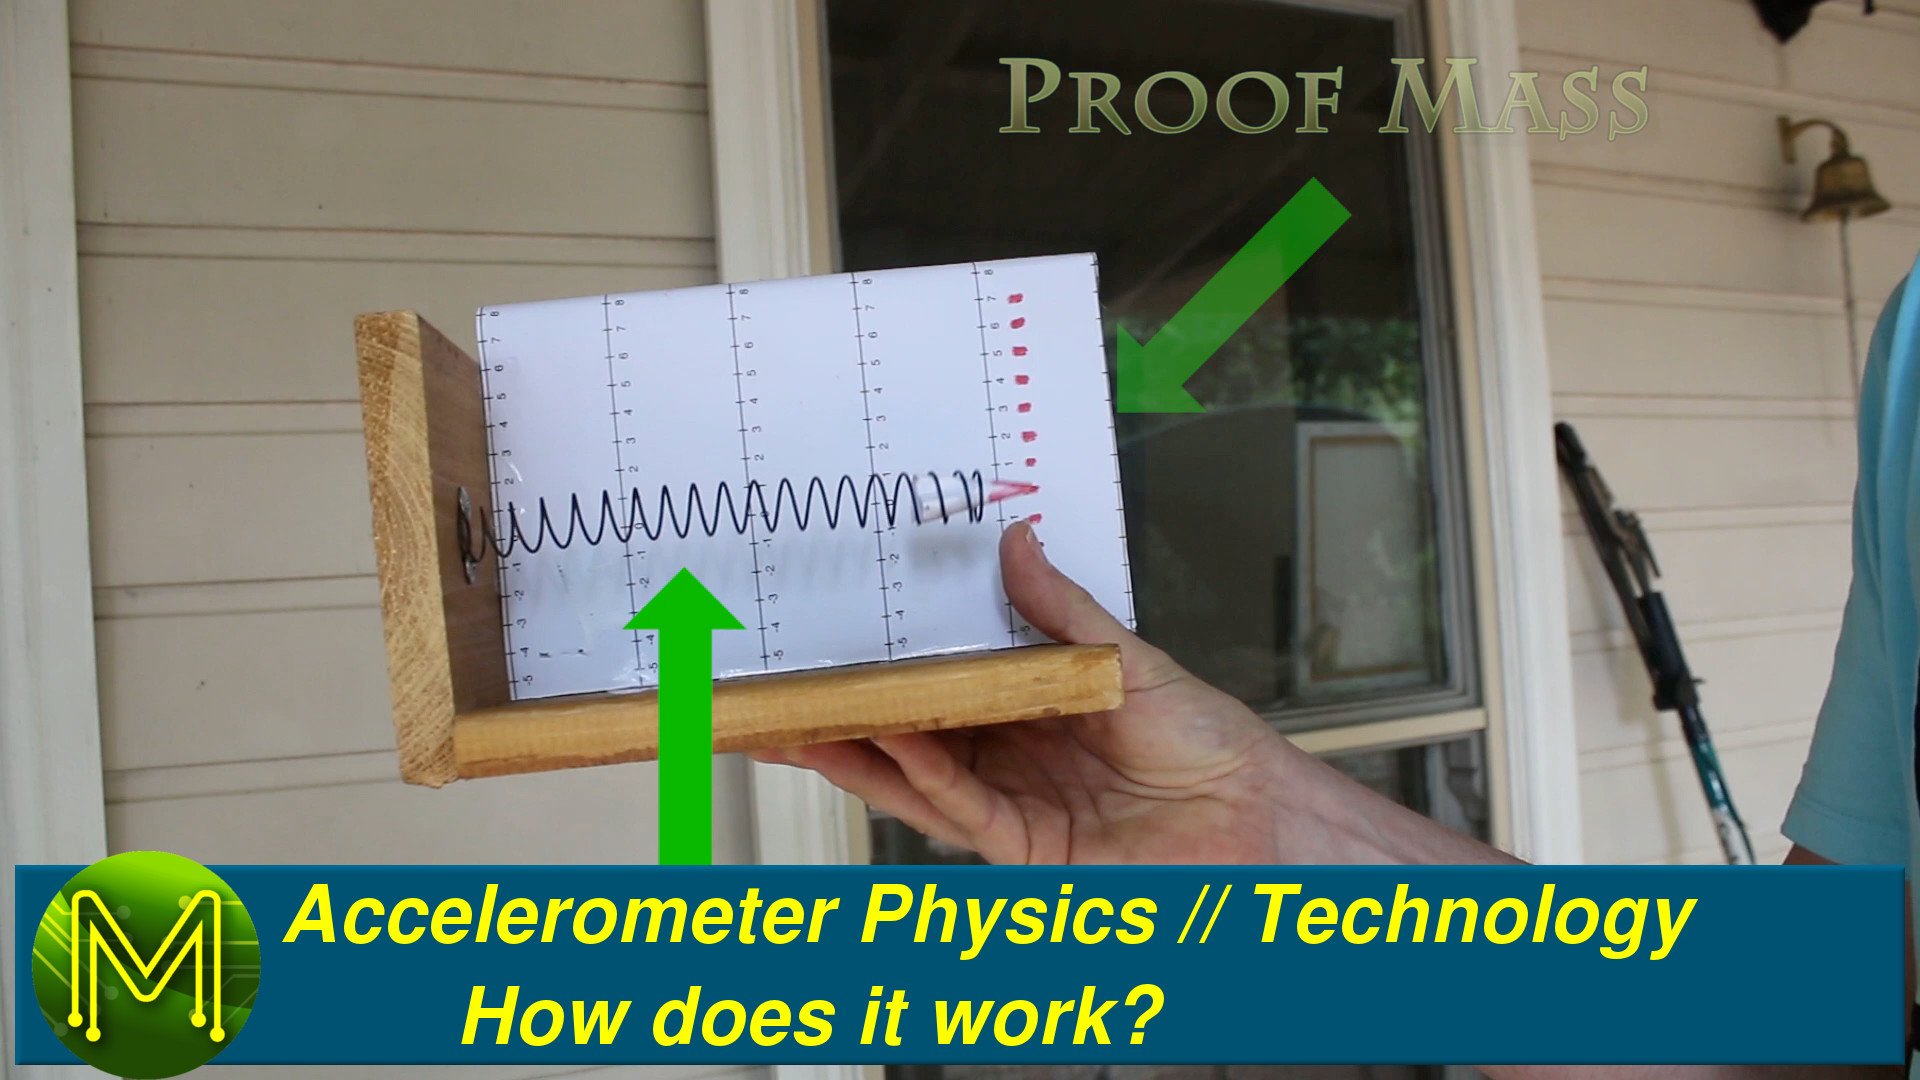 Accelerometer Physics: How does it work? // Technology